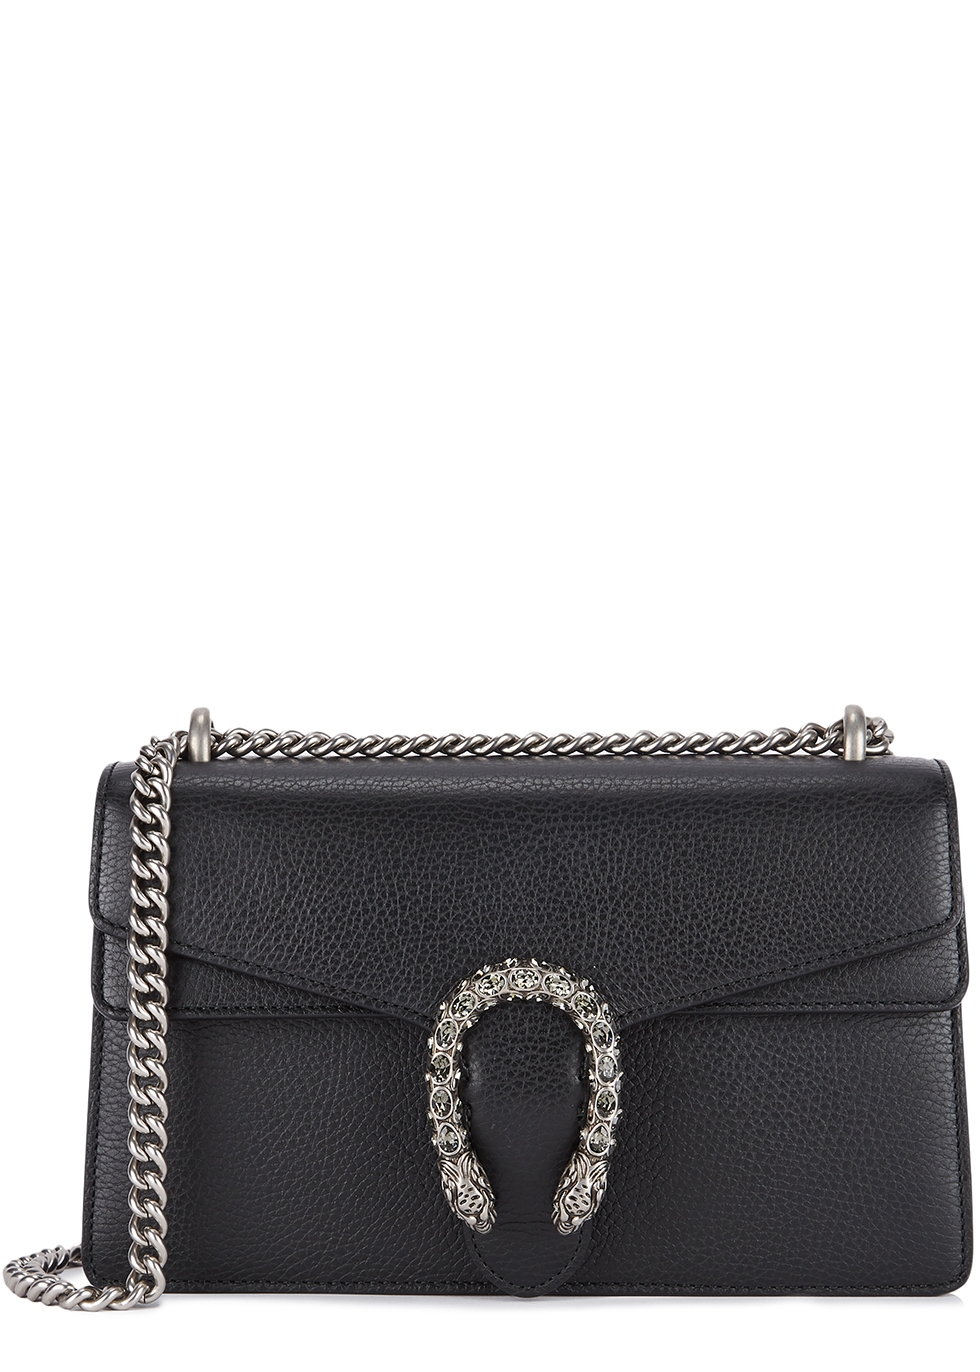 Gucci Dionysus small black leather 